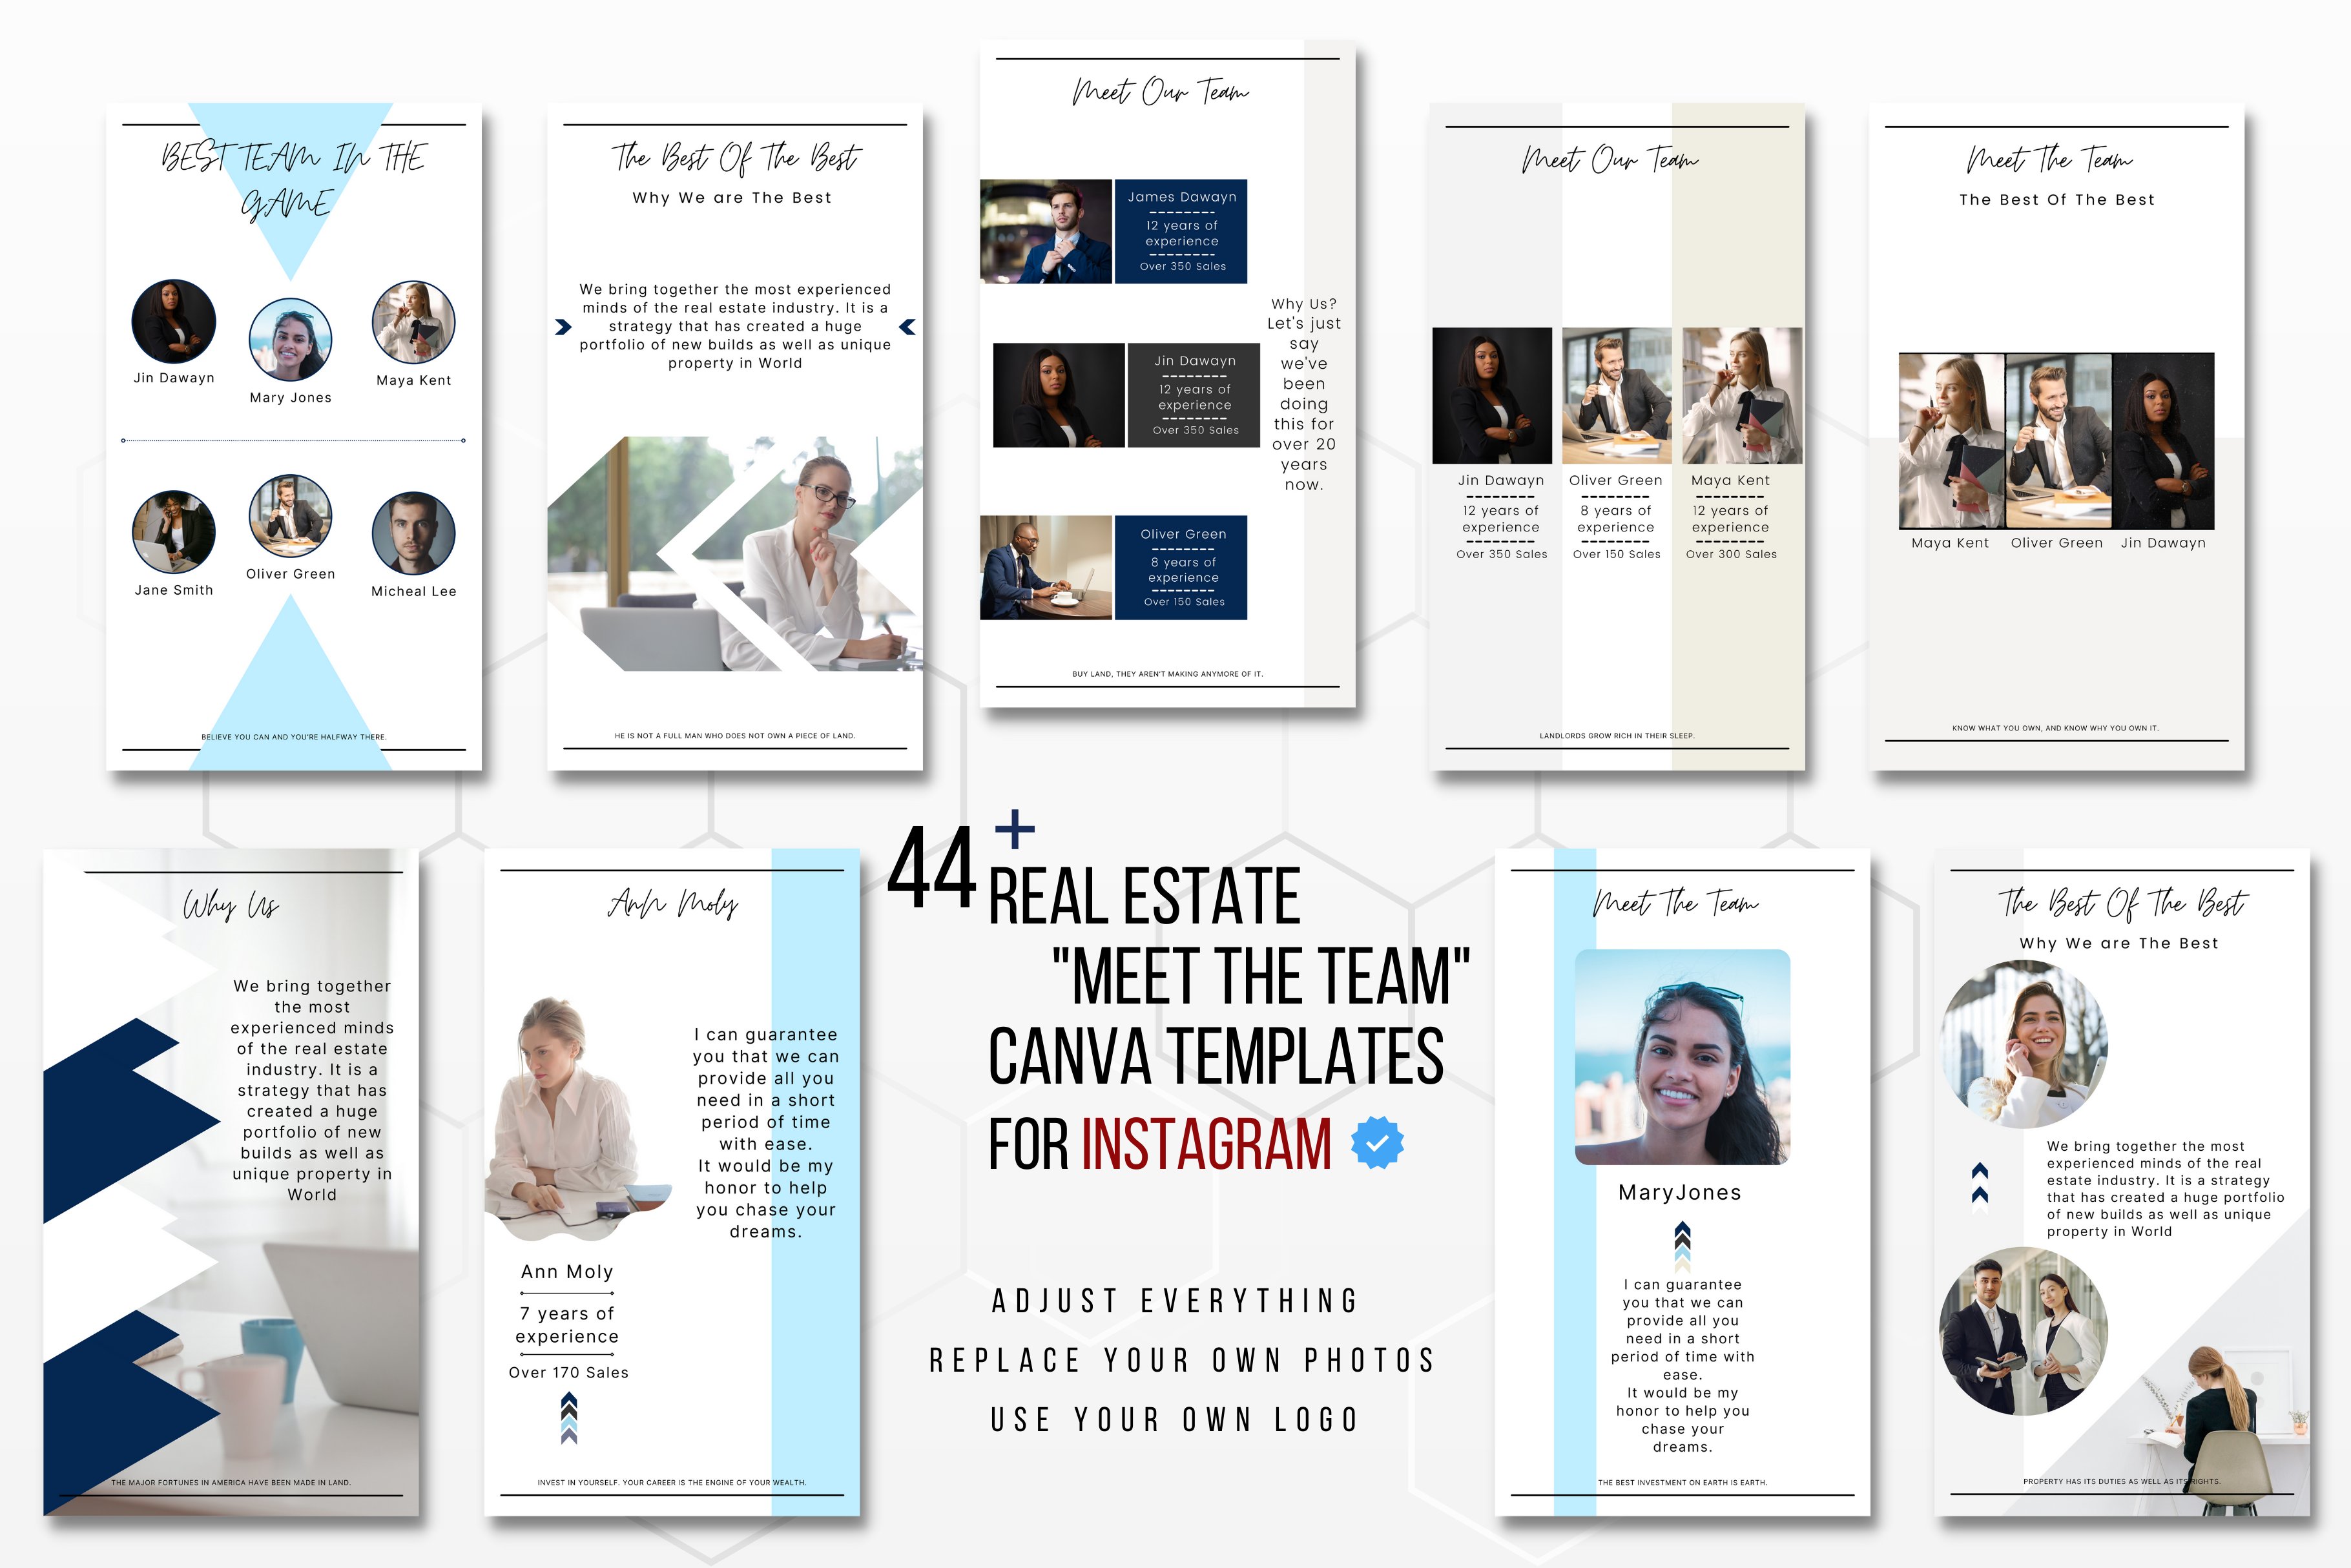 meet-the-team-canva-template-by-kay-design-on-dribbble